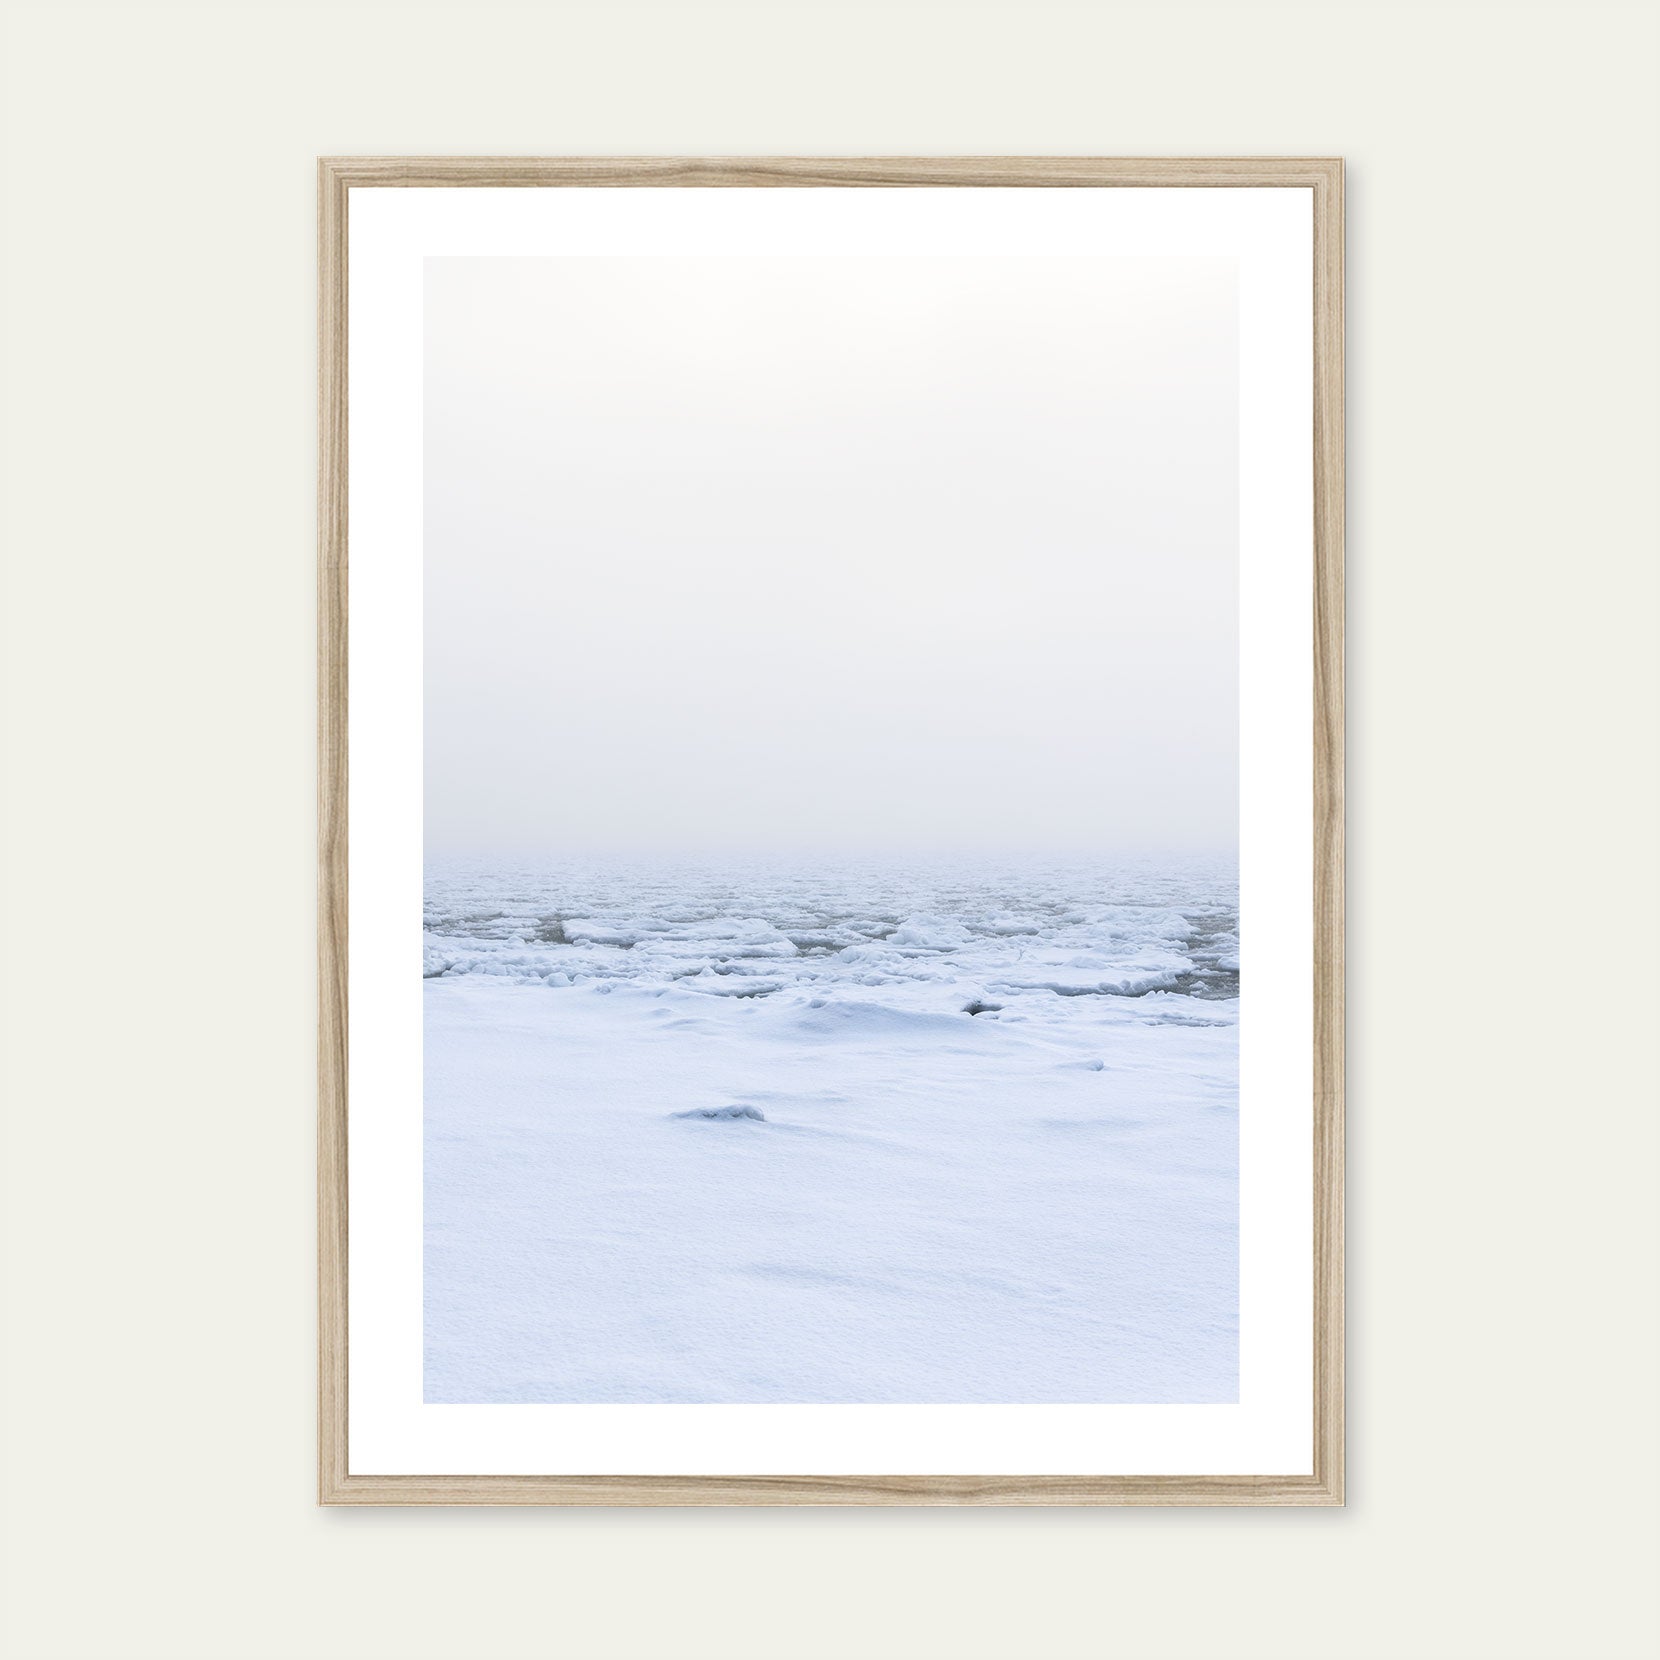 A wood framed print of a snow covered shoreline with fog